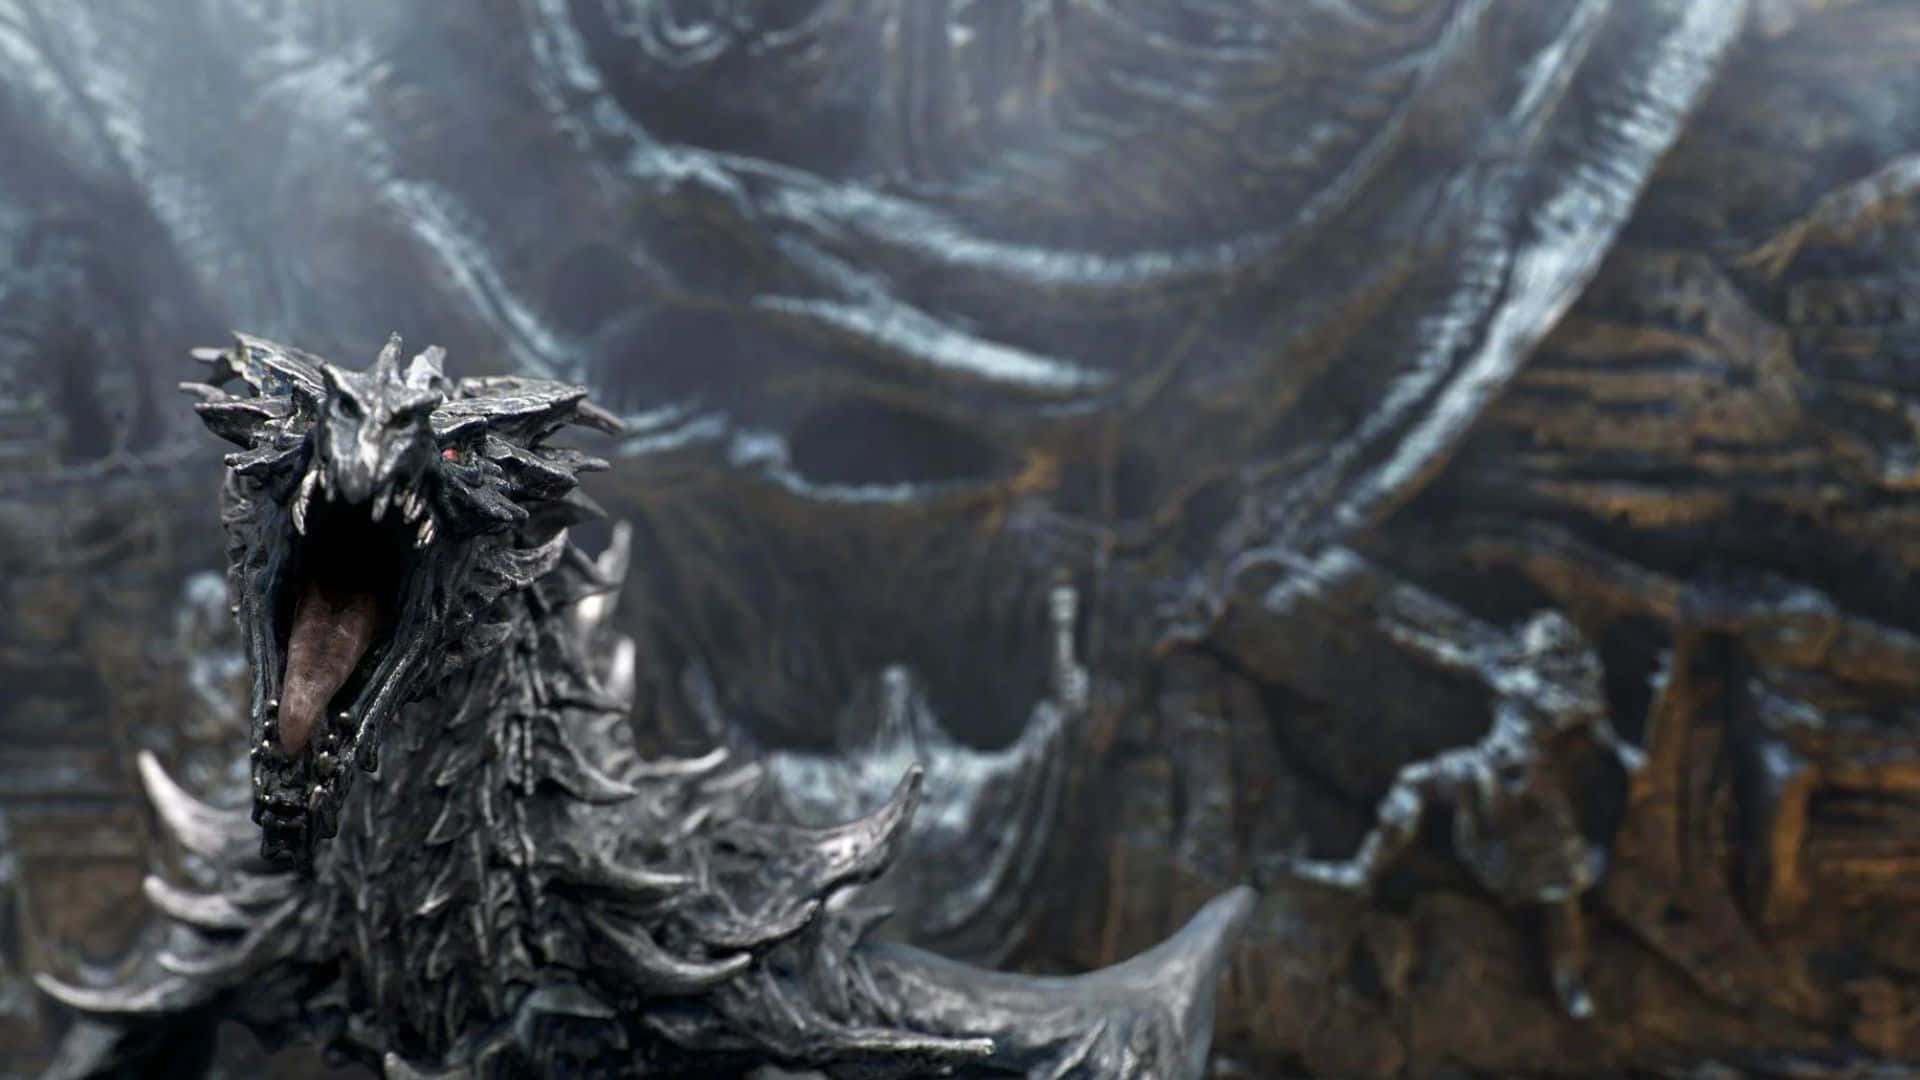 Alduin, the World Eater, unleashes his fiery wrath in Skyrim Wallpaper